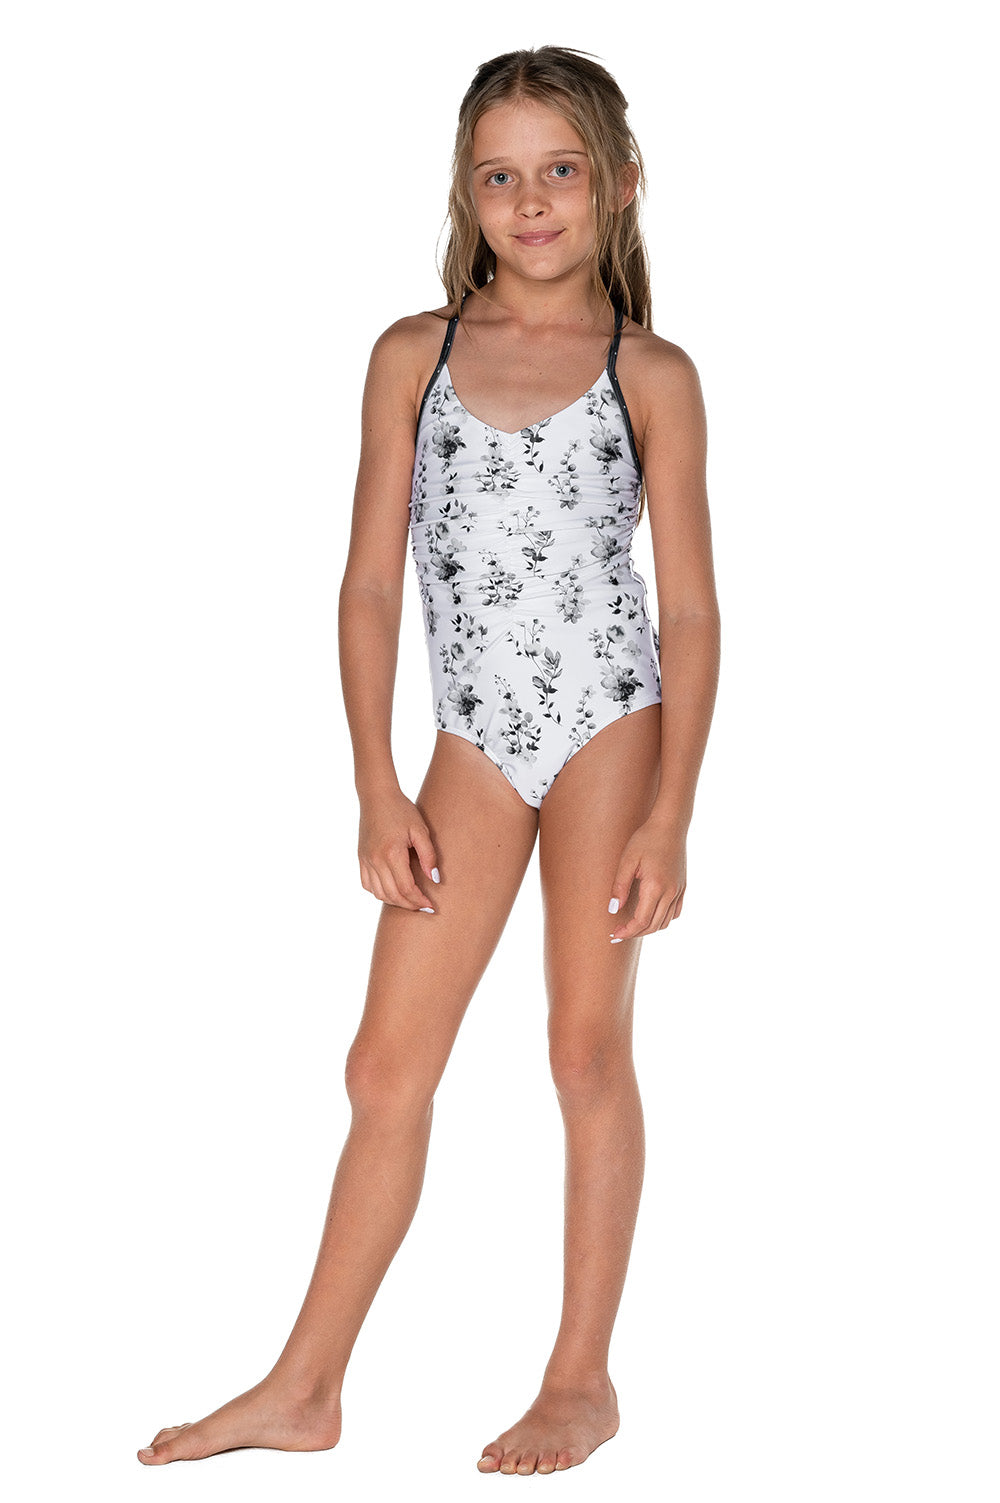 Girls One Piece Cross Back Swimsuit - White Floral - Arizona - Front